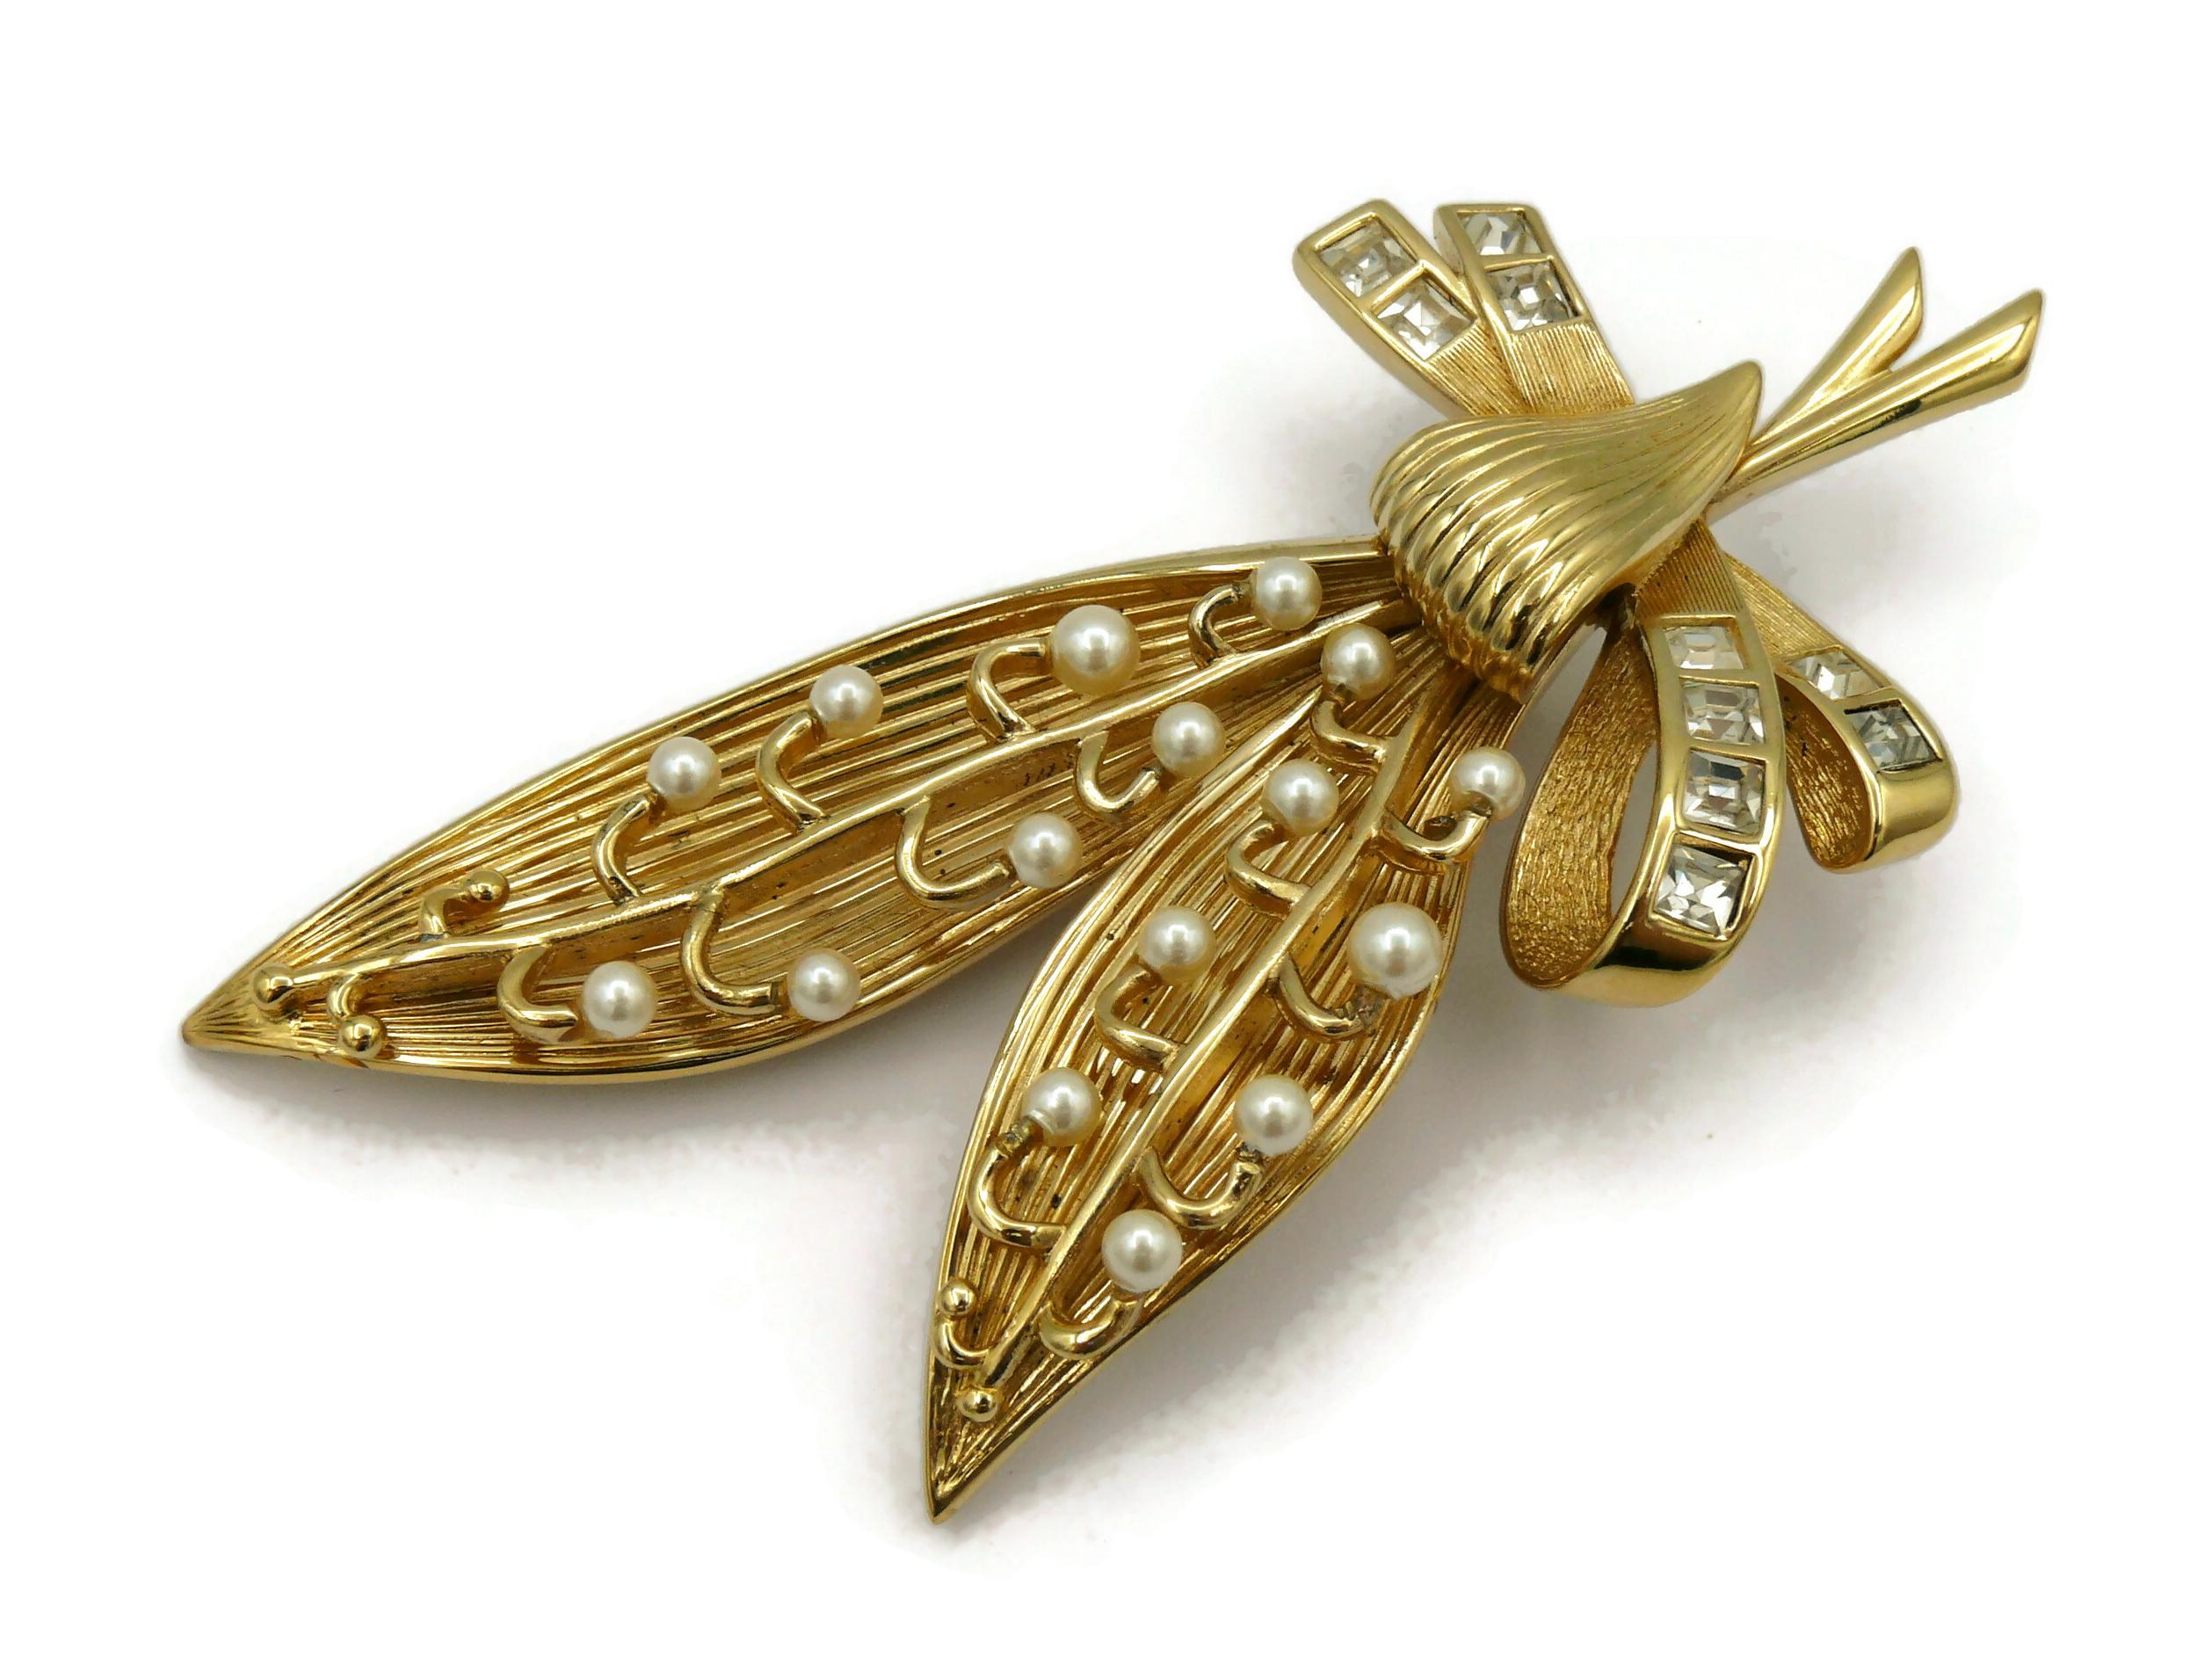 CHRISTIAN DIOR Vintage Lily of the Valley Brooch 1